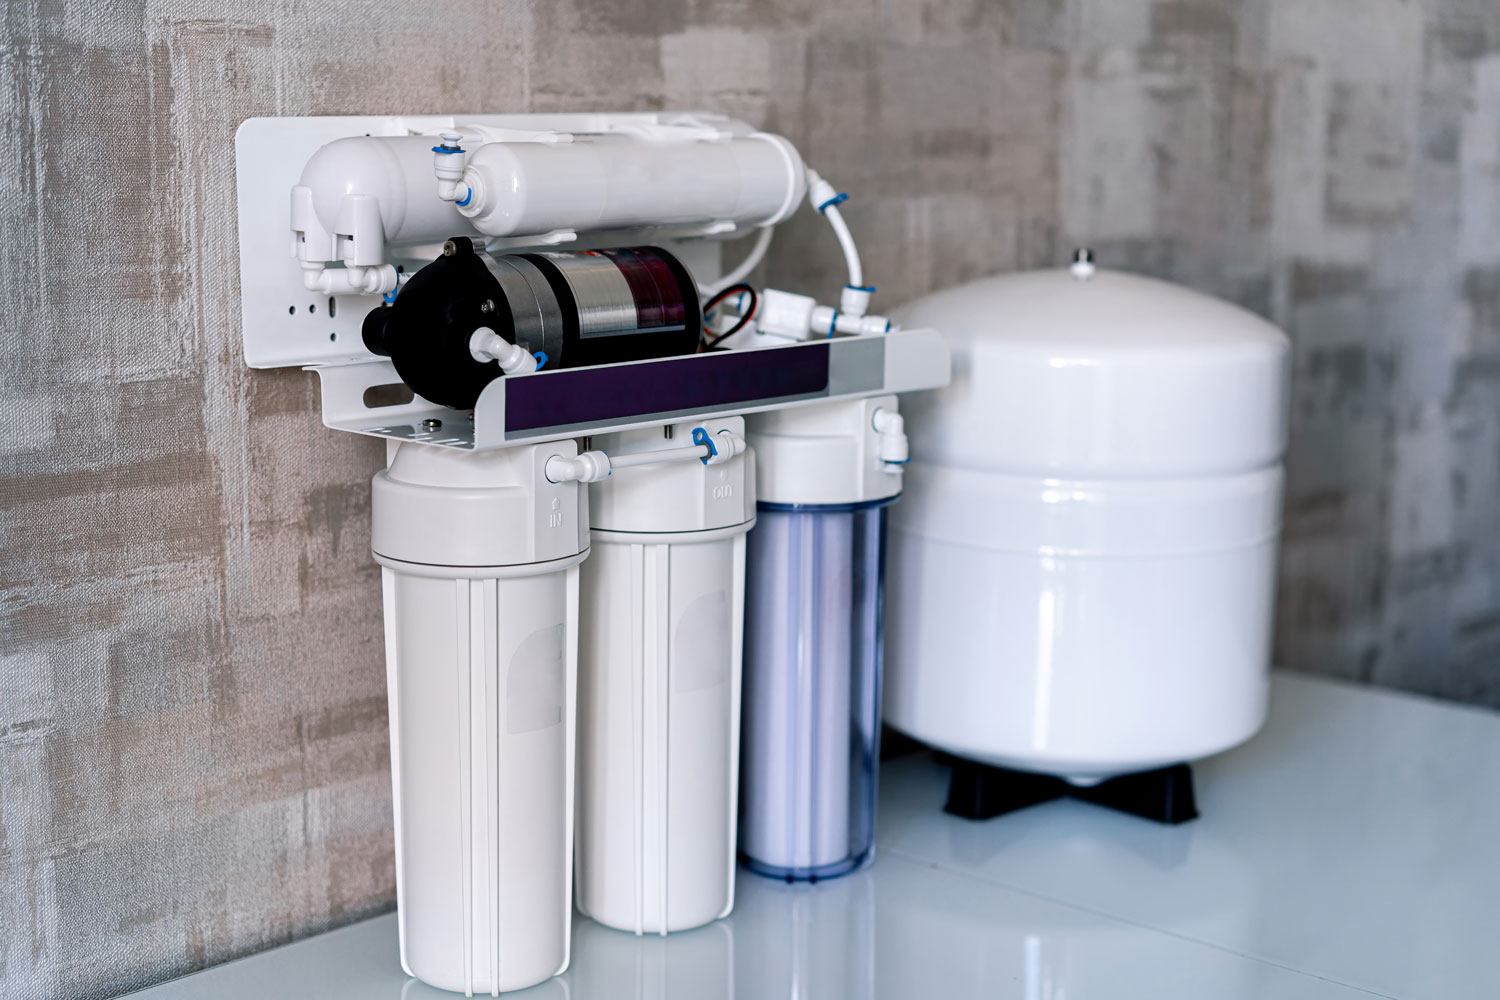 A three-stage filtration system underneath the kitchen sink